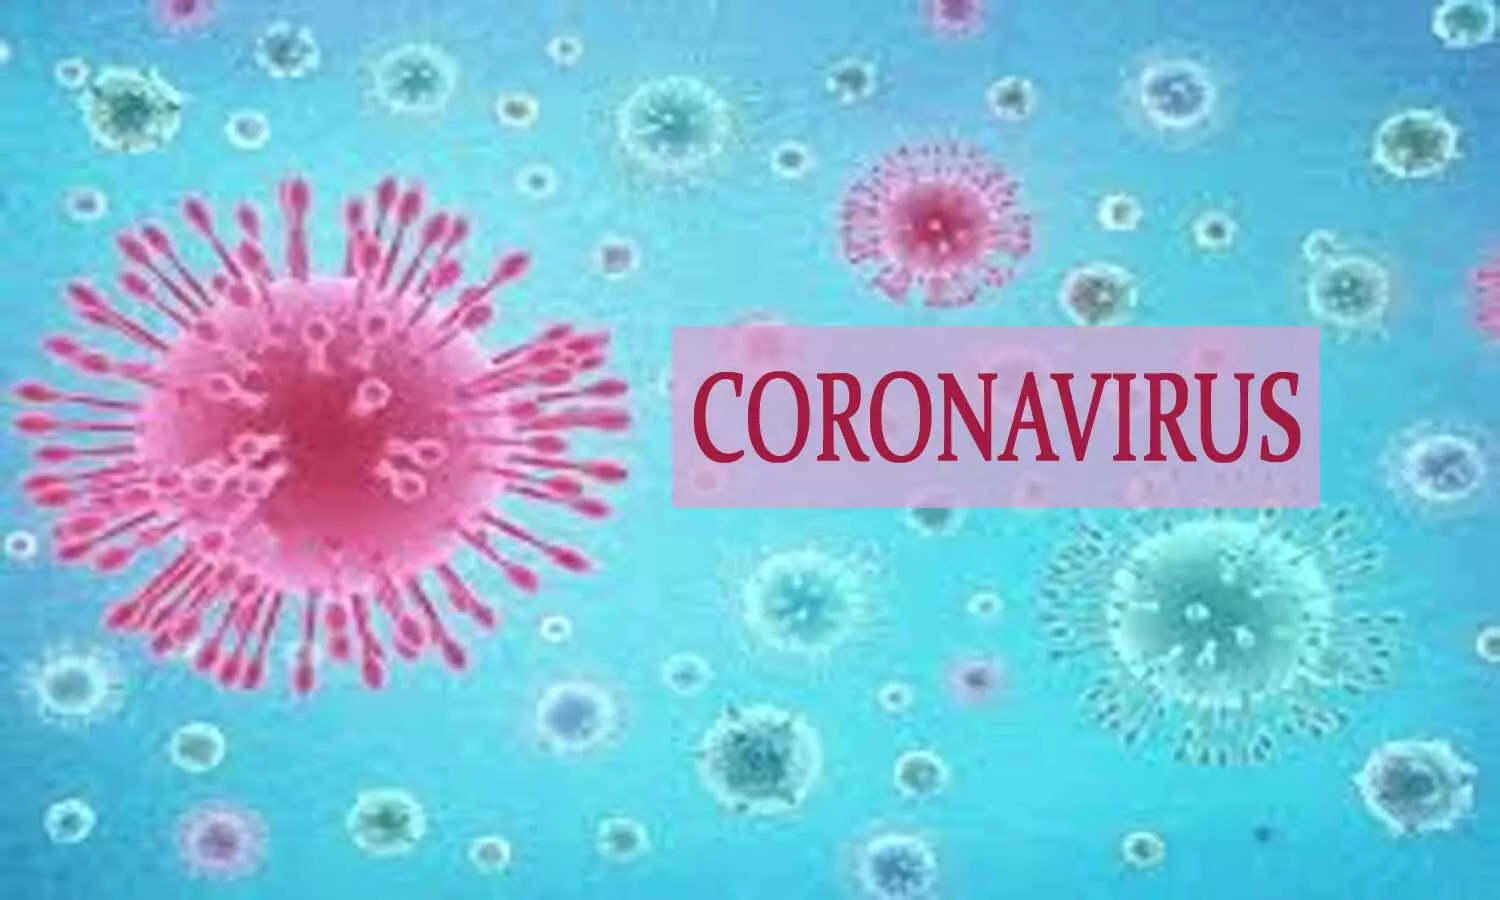 Indias coronavirus cases per lakh population among lowest in the world: Union Health Ministry